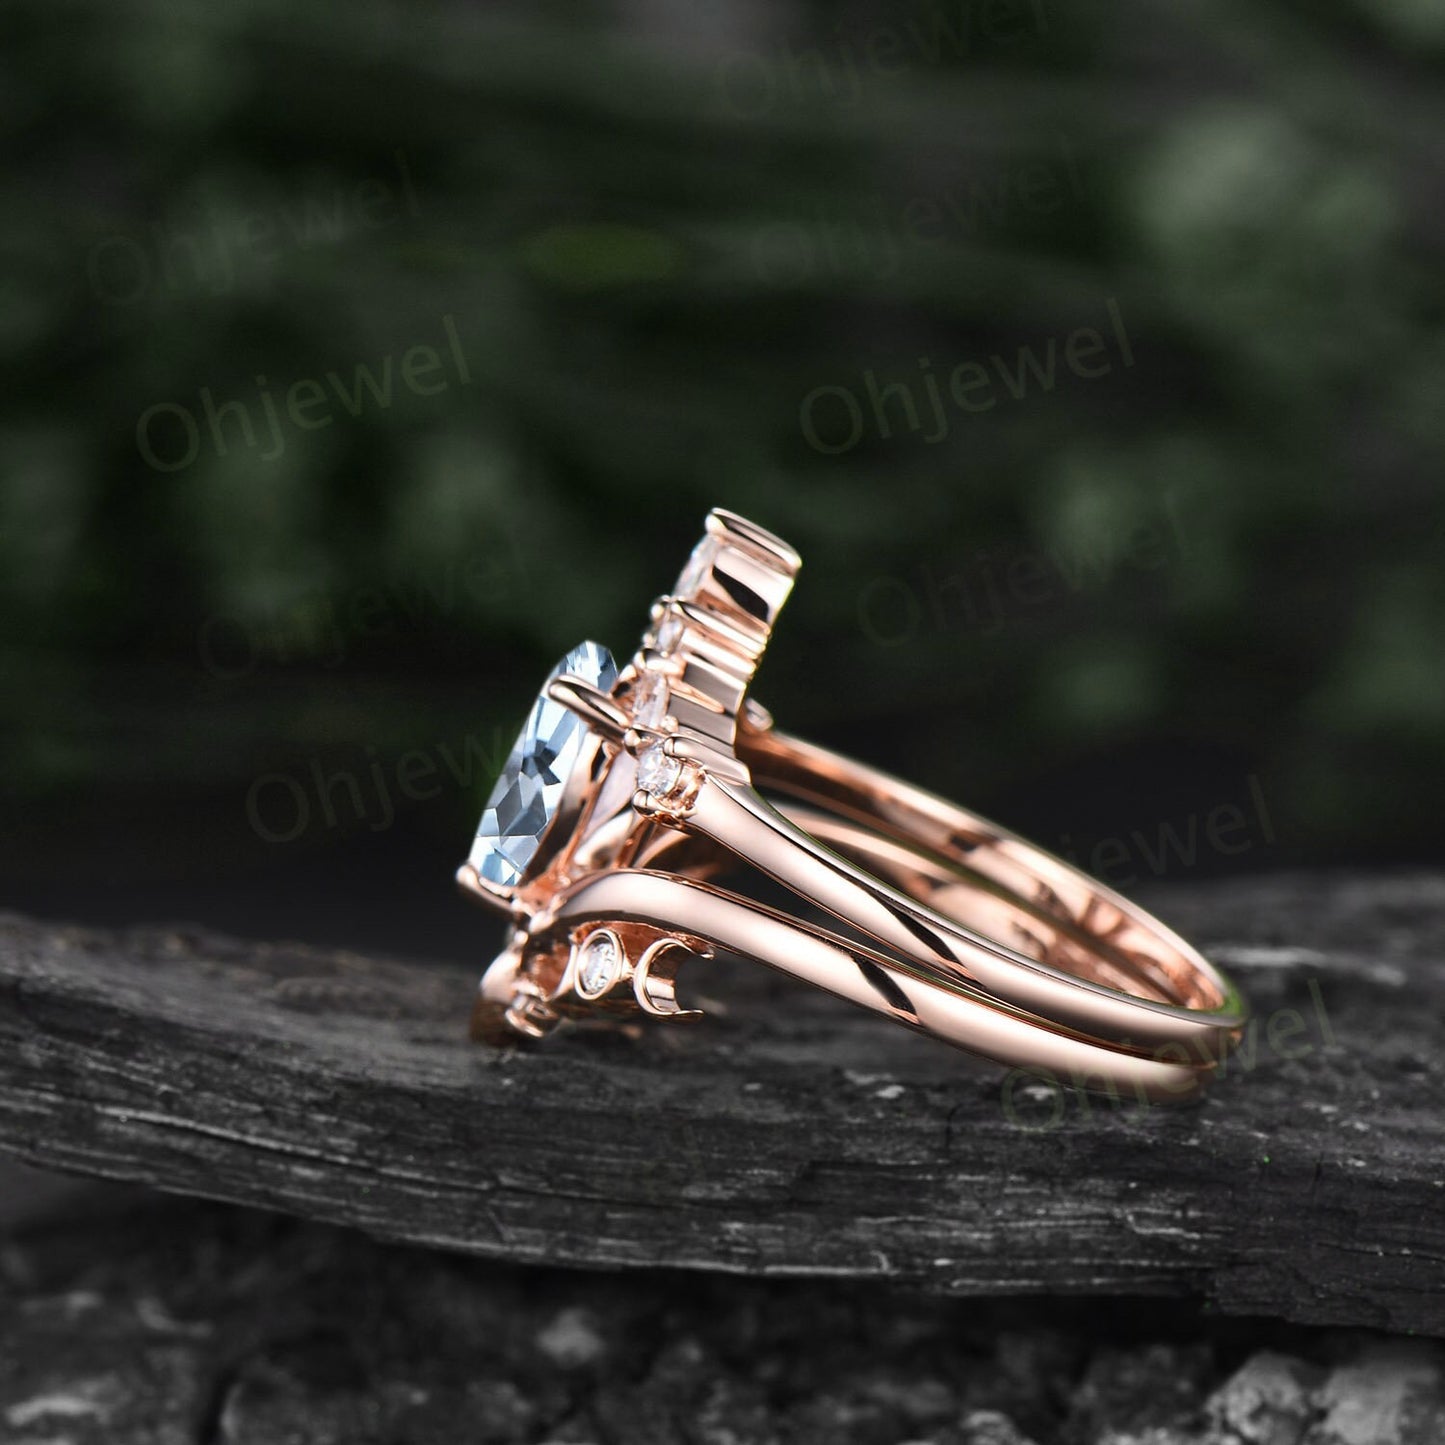 Pear shaped Aquamarine ring rose gold vintage cluster unique engagement ring marquise diamond anniversary promise wedding ring set for women